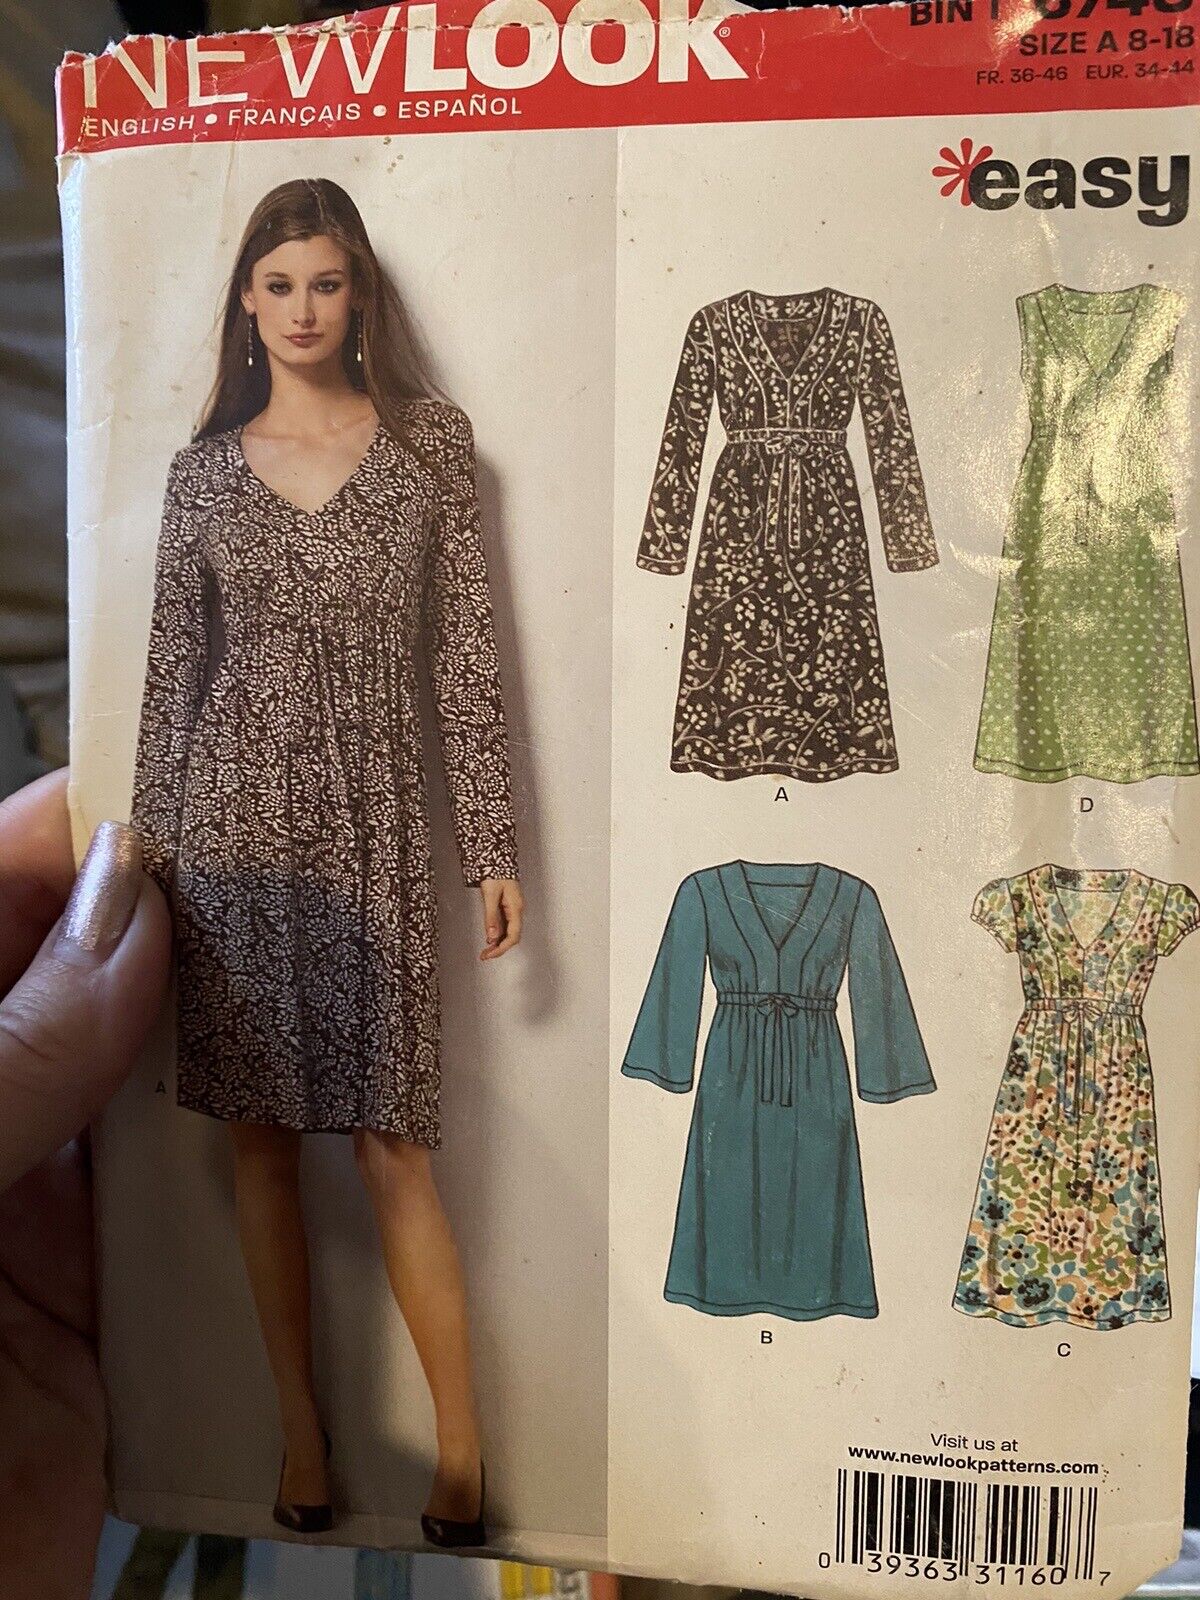 Vintage New Look Sewing Pattern 6748 Size 8-18 Cut and Complete 